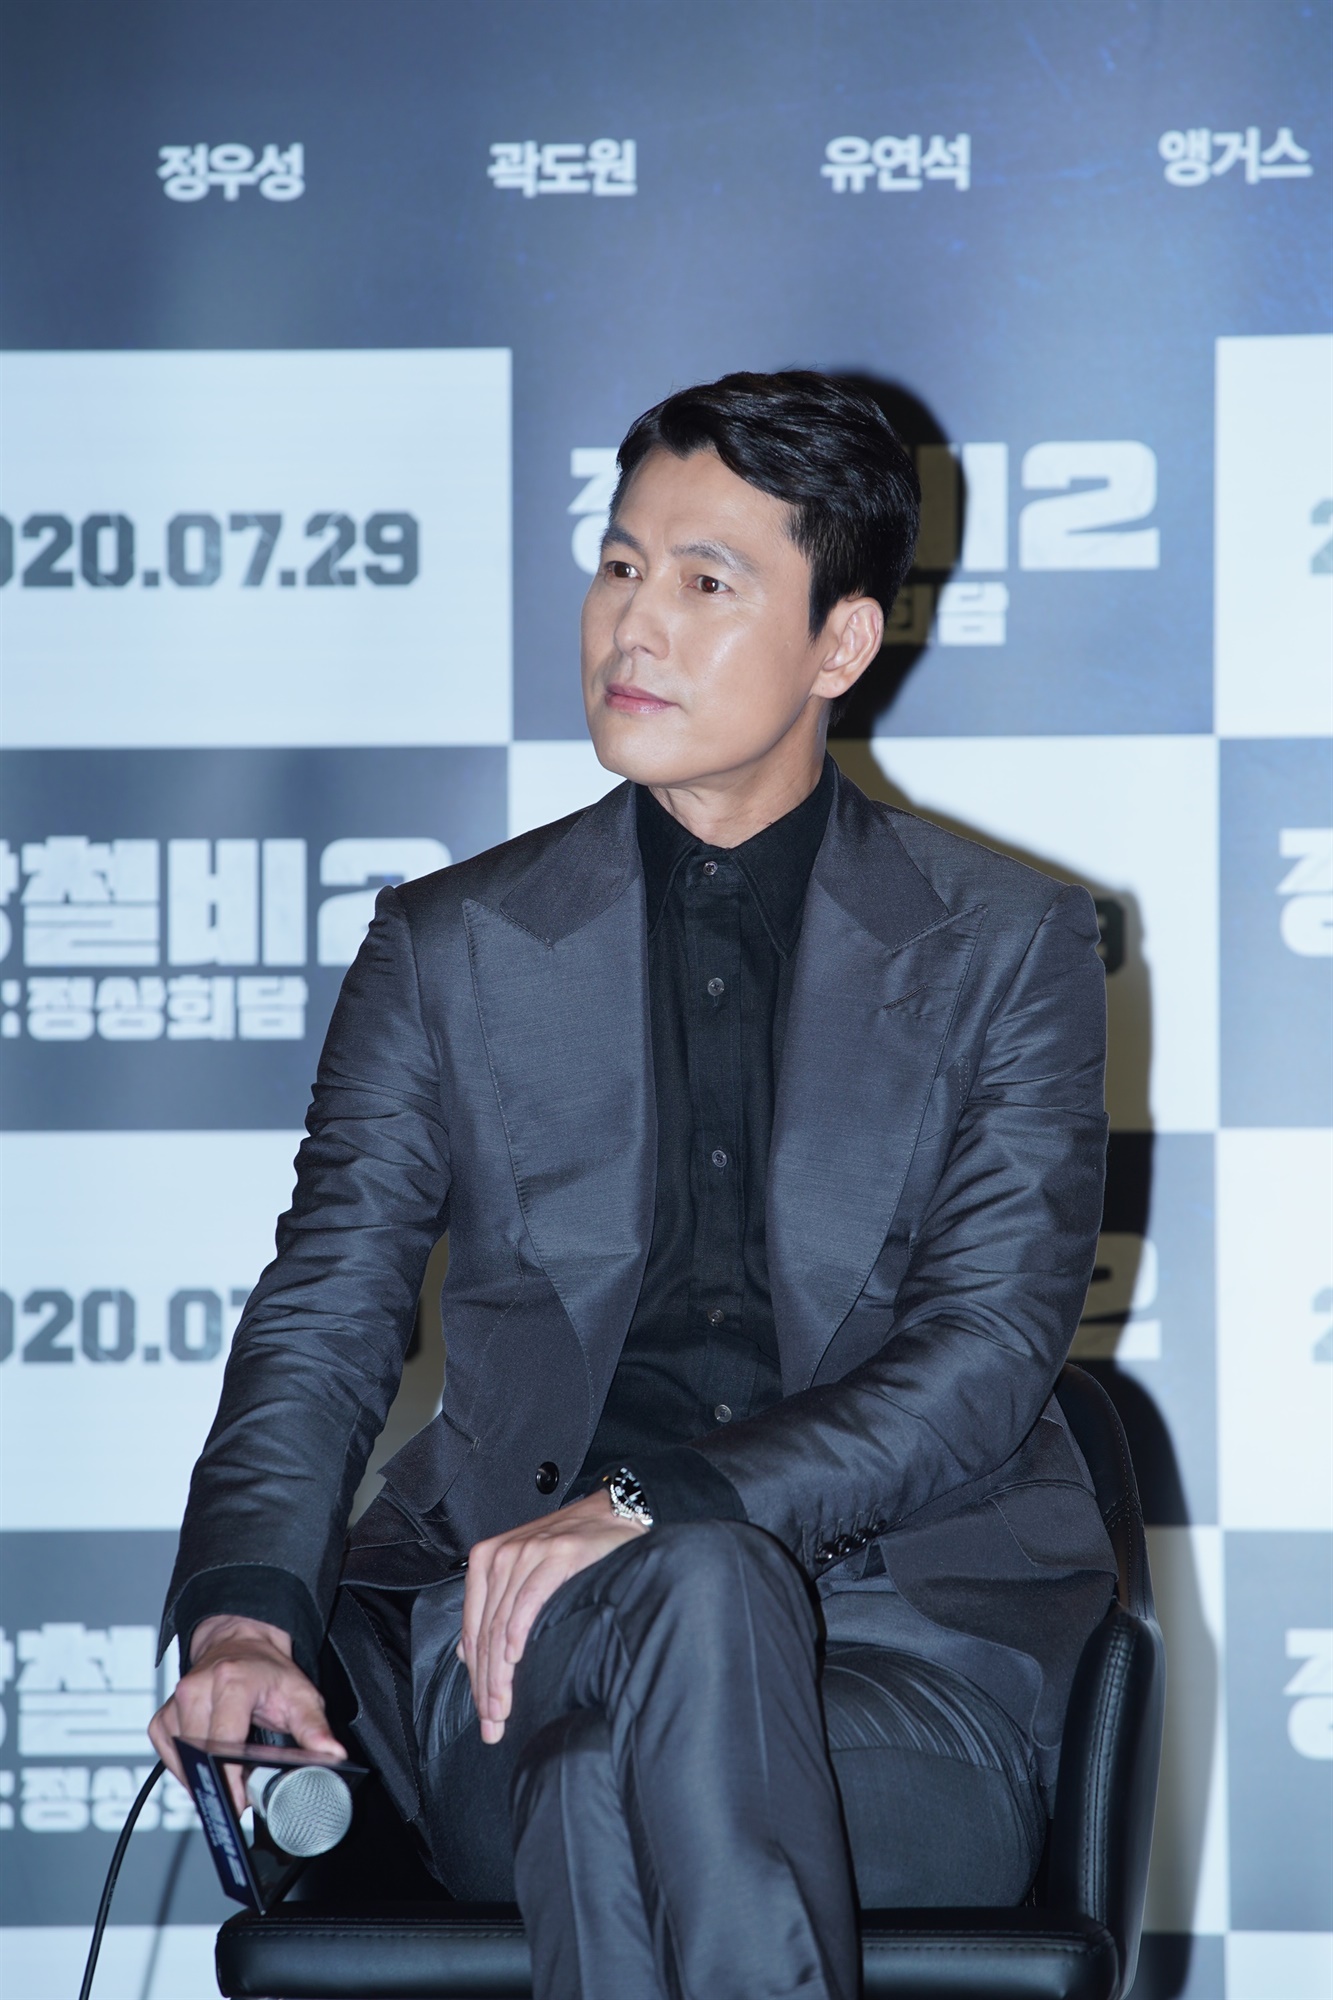 Steel Rain 2, which is scheduled to open on the 29th, is being kidnapped by President of the Republic of Korea (Jung Woo-sung), North Koreas top leader, Chairman of the State Council (Yoo Yeon-Seok), and United States of America (Angus McFadden) who met to conclude the North Korea Peace Agreement. Draws an unexpected Summit that takes place.This <Steel Rain 2> is about the Korean Peninsula inter-Korean relations like the movie <Steel Rain> released in 2017, but it is not a sequel to the contents.Its a complementary sequel, explained director Woo-seok Yang.After the collapse of the Cold War system in 1991, (international) patterns changed, but still for more than 30 years, Korean Peninsula is in Danger.In 2017, the war Danger was inevitably approaching, so I wanted to see what Korea could do if it could decide (on its own).So, I solved the story cinematically through two Cheolwoo (Jung Woo-sung, Kwak Do-won).Actors starring Jung Woo-sung and Kwak Do-won, who starred in the first episode of Steel Rain, appeared as they were, but their roles were completely different.Jung Woo-sung, who played the role of North Koreas most elite agent, Uhm Chul-woo, has been divided into President Han Kyung-jae, who dreams of signing a peace treaty.Jung Woo-sung said, Suddenly, I thought, Why do you keep throwing homework at me?I had a lot of trouble to decide to do it. Jung Woo-sung said he was acting with reference to the previous presidents who led the Summit.It was a Character that was really hard to prepare - I was having trouble getting to know how to approach it.I looked at the history of the presidents who led the North and South Summits and referred to what sentiments they looked at in Korean Peninsula.I think I thought a lot about my personal philosophy or my mission as a politician.What kind of perspective did the presidents who were looking at the future of Korean Peninsula, compassion for our nation and history, lead the Summit?I tried to find out the sentiments of President Han Gyeong-jae in that part of the story. Kwak Do-won, who was the senior presidential secretary for foreign affairs and security in the first episode, transforms into Park Jin-woo, the director of the North Korean hardline escort, who opposes the abandonment of nuclear weapons and the establishment of a peace regime.In the movie, he leads a coup and kidnaps three leaders with nuclear submarines, making the situation extreme.Kwak Do-won said, I was expecting that the bishop would do <Steel Rain 2>, so I would be president or class.He then said: I thought (Park Jin-woo) should not be a villain and I took an Act.I thought that I represented one of the two conflicting positions that North Korea shows on the world stage.I had a lot of troubles (before I took over the role), but the scenario was so fun. I was looking forward to the full change in the role with the first.I was curious because I was the first North Korea military role. As Actors change their camp and act, I wanted to show you the irony that even if the South and North positions change, the current system is unlikely to change, said Woo-Seok Yang, director of the major actors.Instead, the actors who came out of United States of America, China and Japan in the first episode are Acting.Even if the South and the North change, the external factors have not changed, so two more than one may come more sadly. Yoo Yeon-seok, who has been acting as North Koreas chairman of the State Council, has joined the new Steel Rain 2.Yoo Yeon-Seok confessed that he tried to draw anguish as a young man who came to the top leadership position at a young age within the cinematic imagination.The joint inter-Korean liaison office was blown up in June, and North Koreas offensive against South Korea continues every day.The South-North relationship, which has been in a sharp downturn, may be a bad external condition for the movie Steel Rain 2.Director Woo-seok Yang emphasized that he nevertheless included the film Gaya as a peace regime.I think that after the Cold War collapsed, inter-Korean relations had changed little; the answer was clear and it was reconciliation mode, tension mode, and a spiral of the pattern.However, if there is a big change in the last two to three years, there is exactly Korean Peninsula between the US and China.The pattern of the roadblock should be broken now. Maybe Gaya will be built by peace.As many will understand, the tension and division of the Korean Peninsula is beneficial to all but the Korean Peninsula party.It is hard to blame it for being morally bad. It is actually returning to the national interest.But tension and conflict are pain for us living in Korean Peninsula. For us to prosper, the peace regime will be a very good enough condition.But we cannot go (to peace) on our own, trying to melt those contents into the work as much as we can.On the other hand, Actors and Woo-seok Yang showed concern about opening the movie in a situation where the number of audiences looking for the theater was very reduced due to the spread of Corona 19.Director Woo-seok Yang said, We are doing a much more thorough prevention in the theater than you think.I would like to say that you are coming to me, but if you want to see the results of our efforts as best as possible, please wear a mask and come to the theater. Jung Woo-sung also told the audience about the audience.Maybe the corona 19 is affecting our entire lives - theres an uneasy mind about opening a movie at this time.I am worried and old-fashioned that you should enjoy the movie safely when you come to the theater. I do not know what will happen, but I met the fate of the movie on the 29th.I would like you to wear a mask and enjoy the movie safely for those who visit the theater. The Report on the Production of the Film 